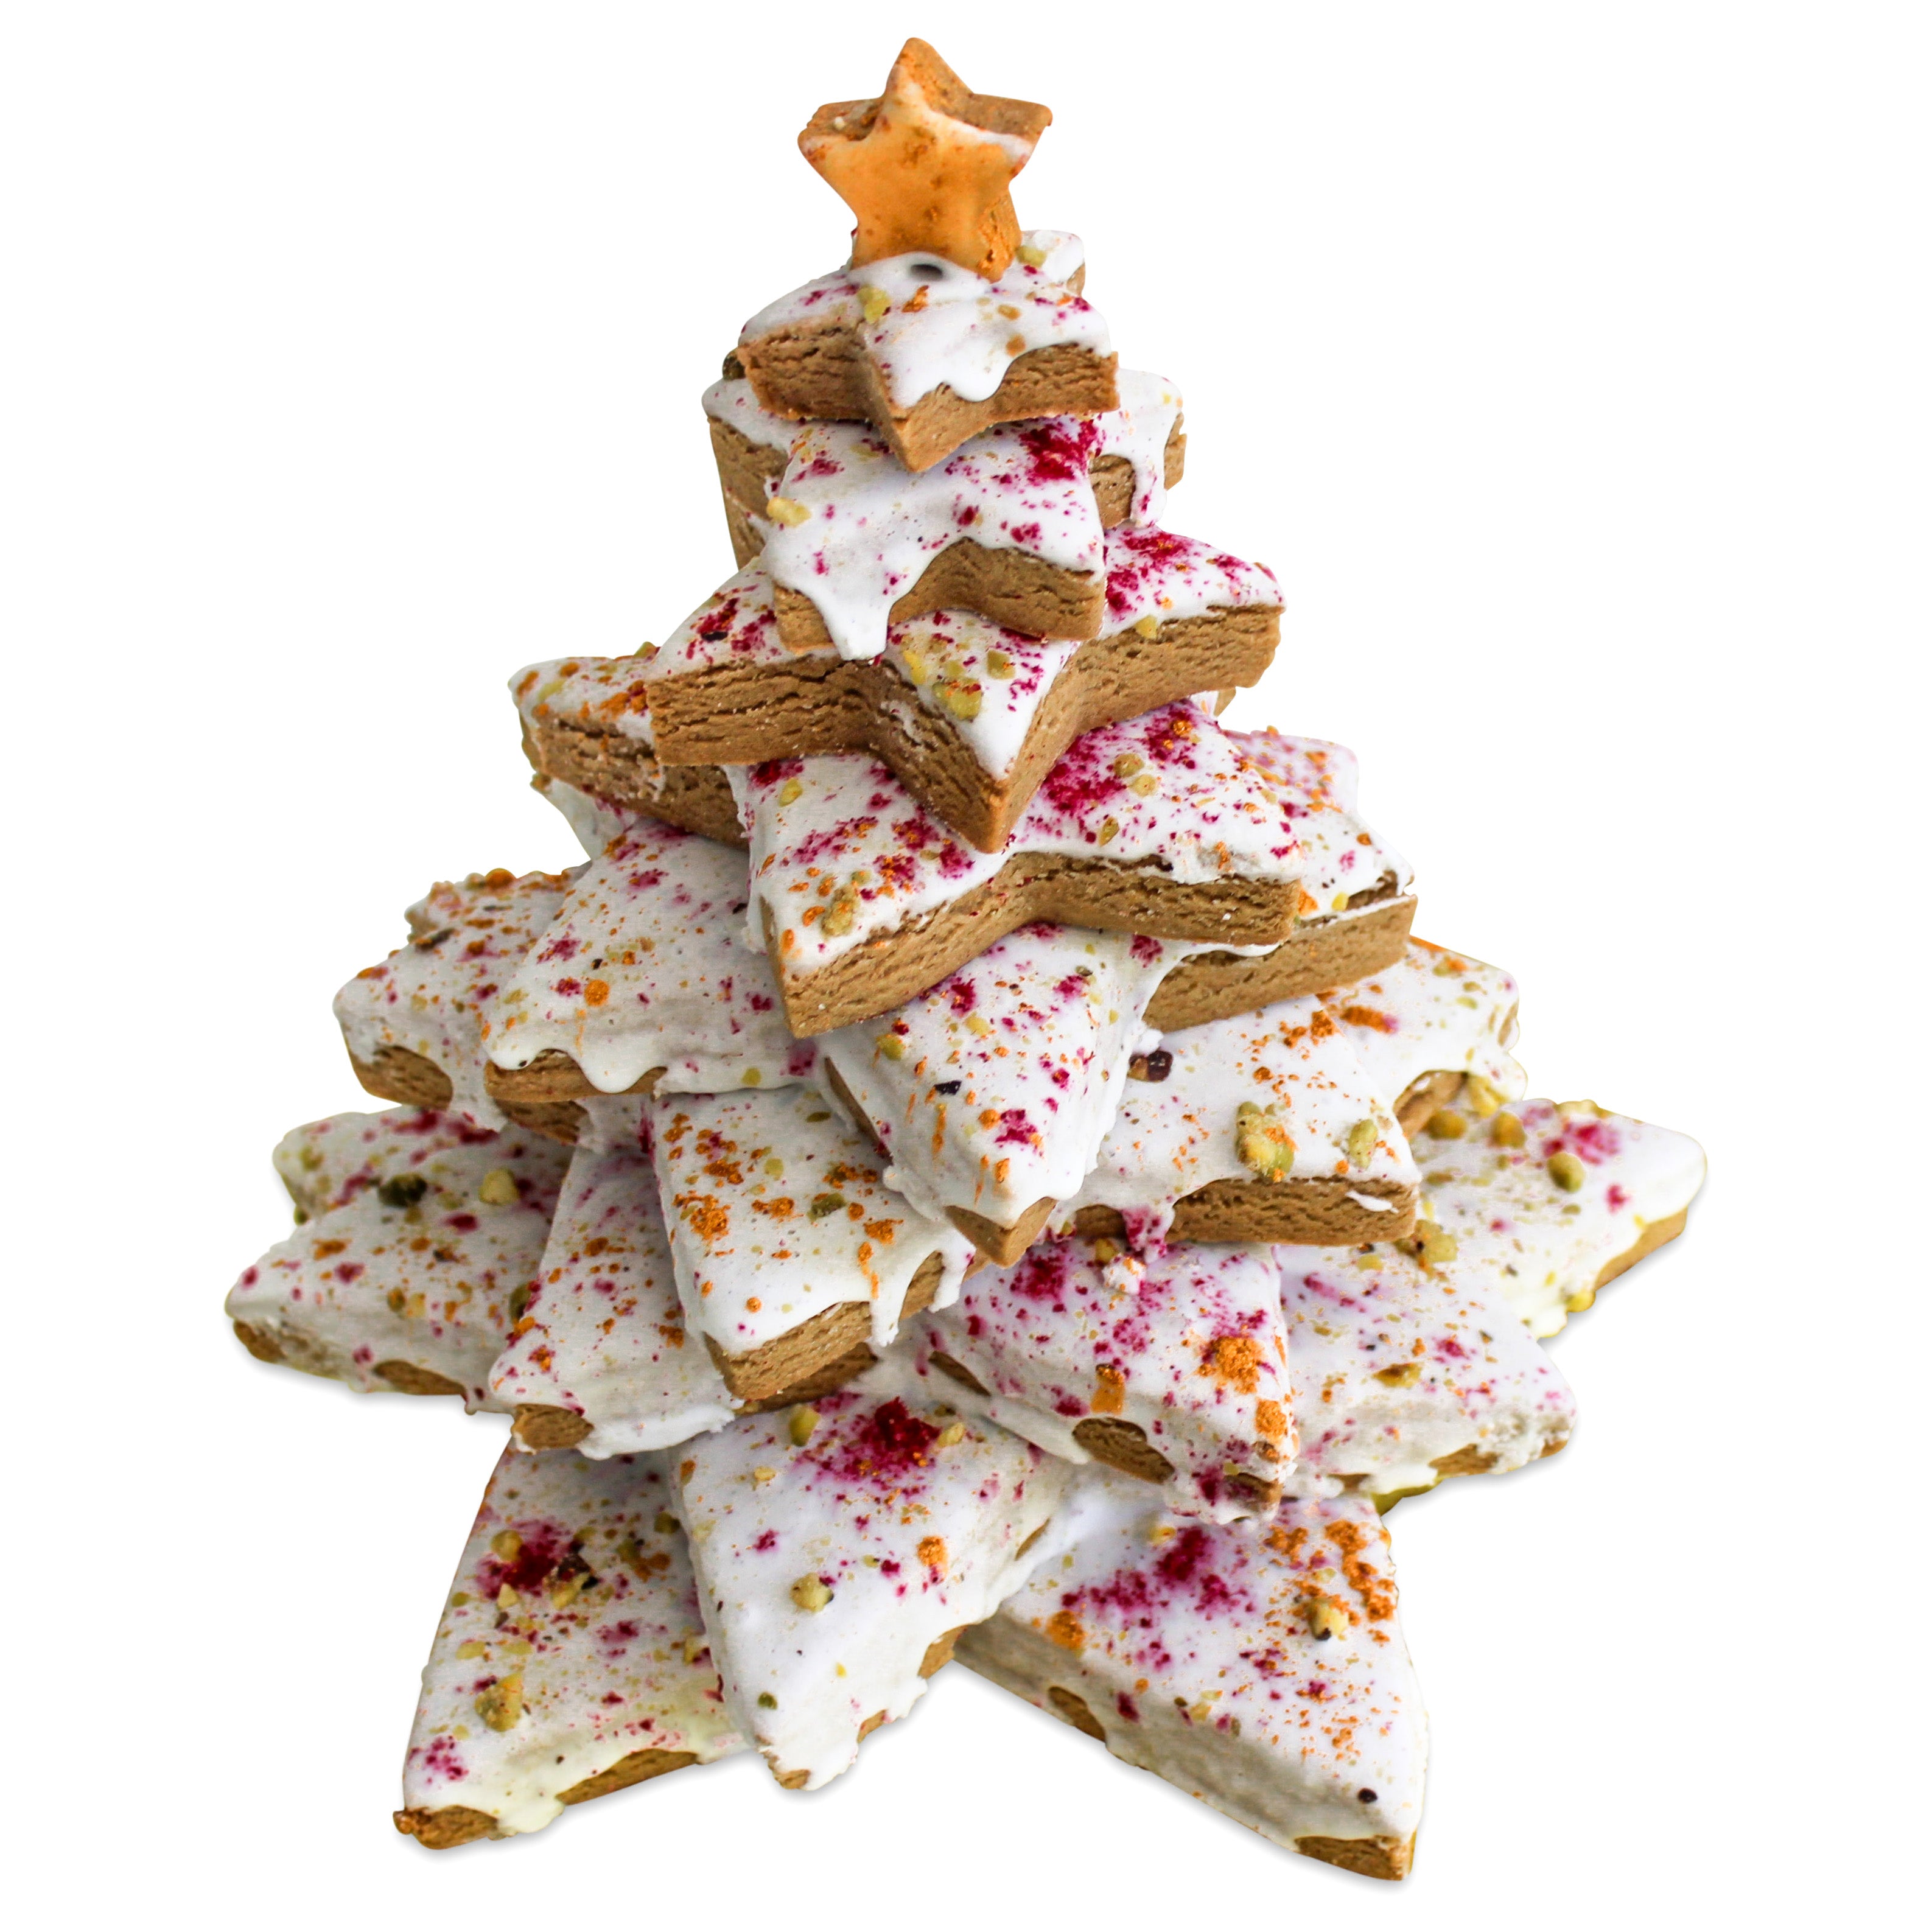 A gingerbread Christmas tree with gold star on top and spinkles of red and gold with pistachios.